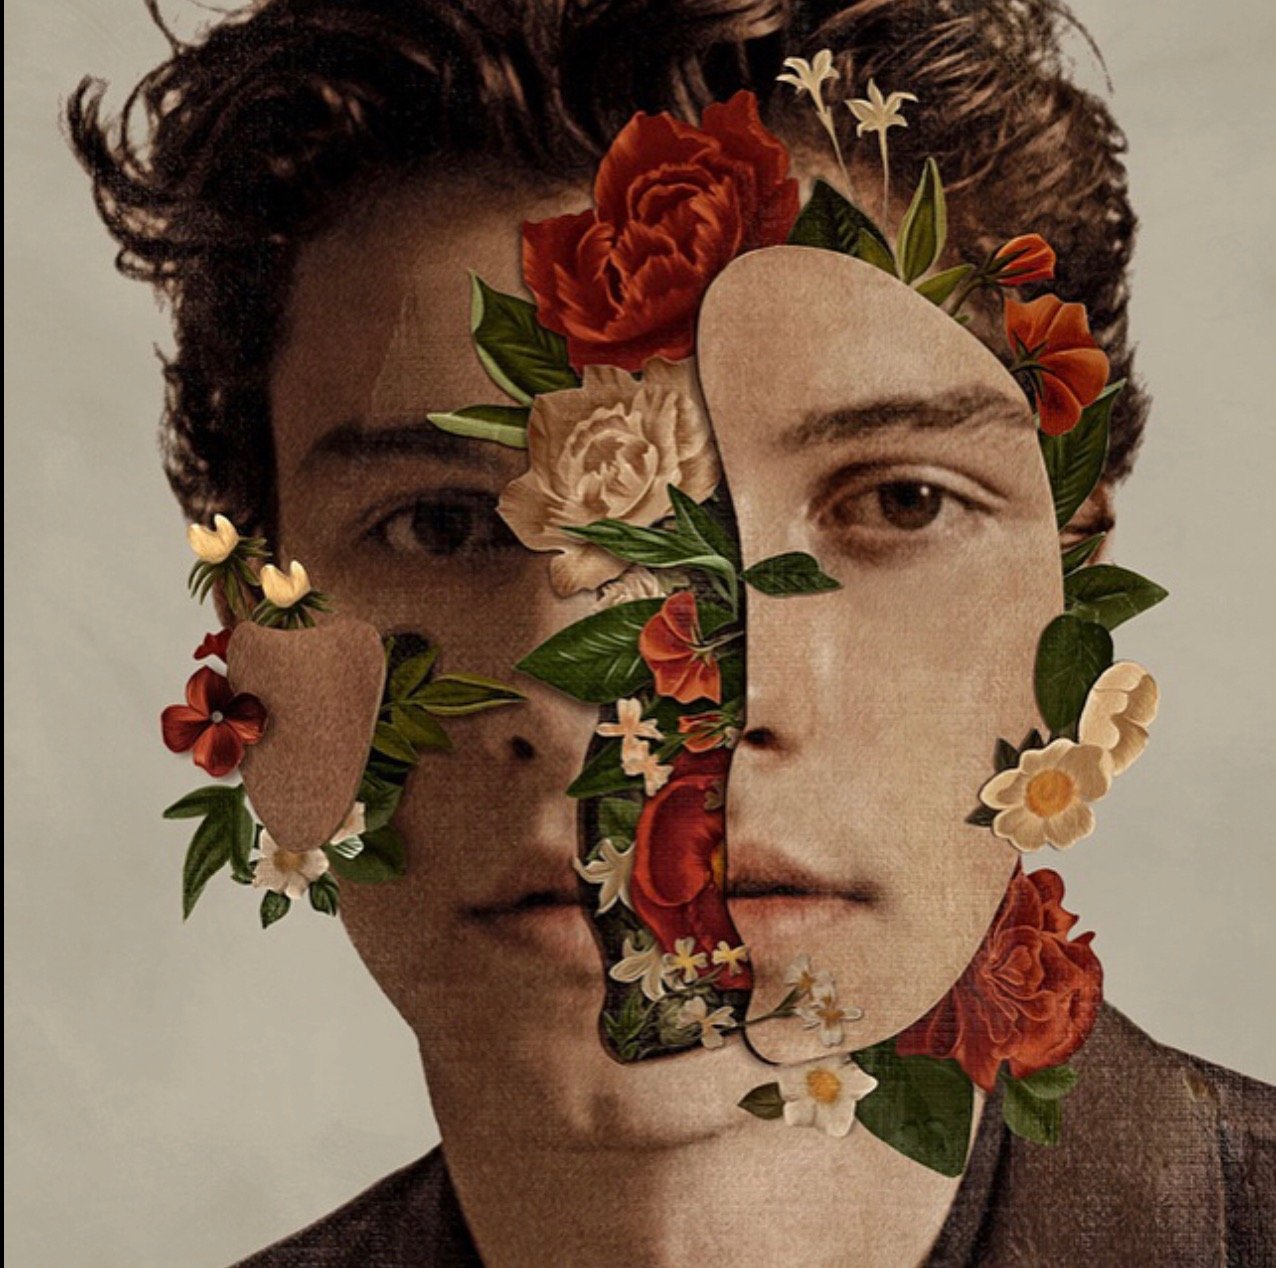 ~fan account ~i love you @ShawnMendes pls follow me